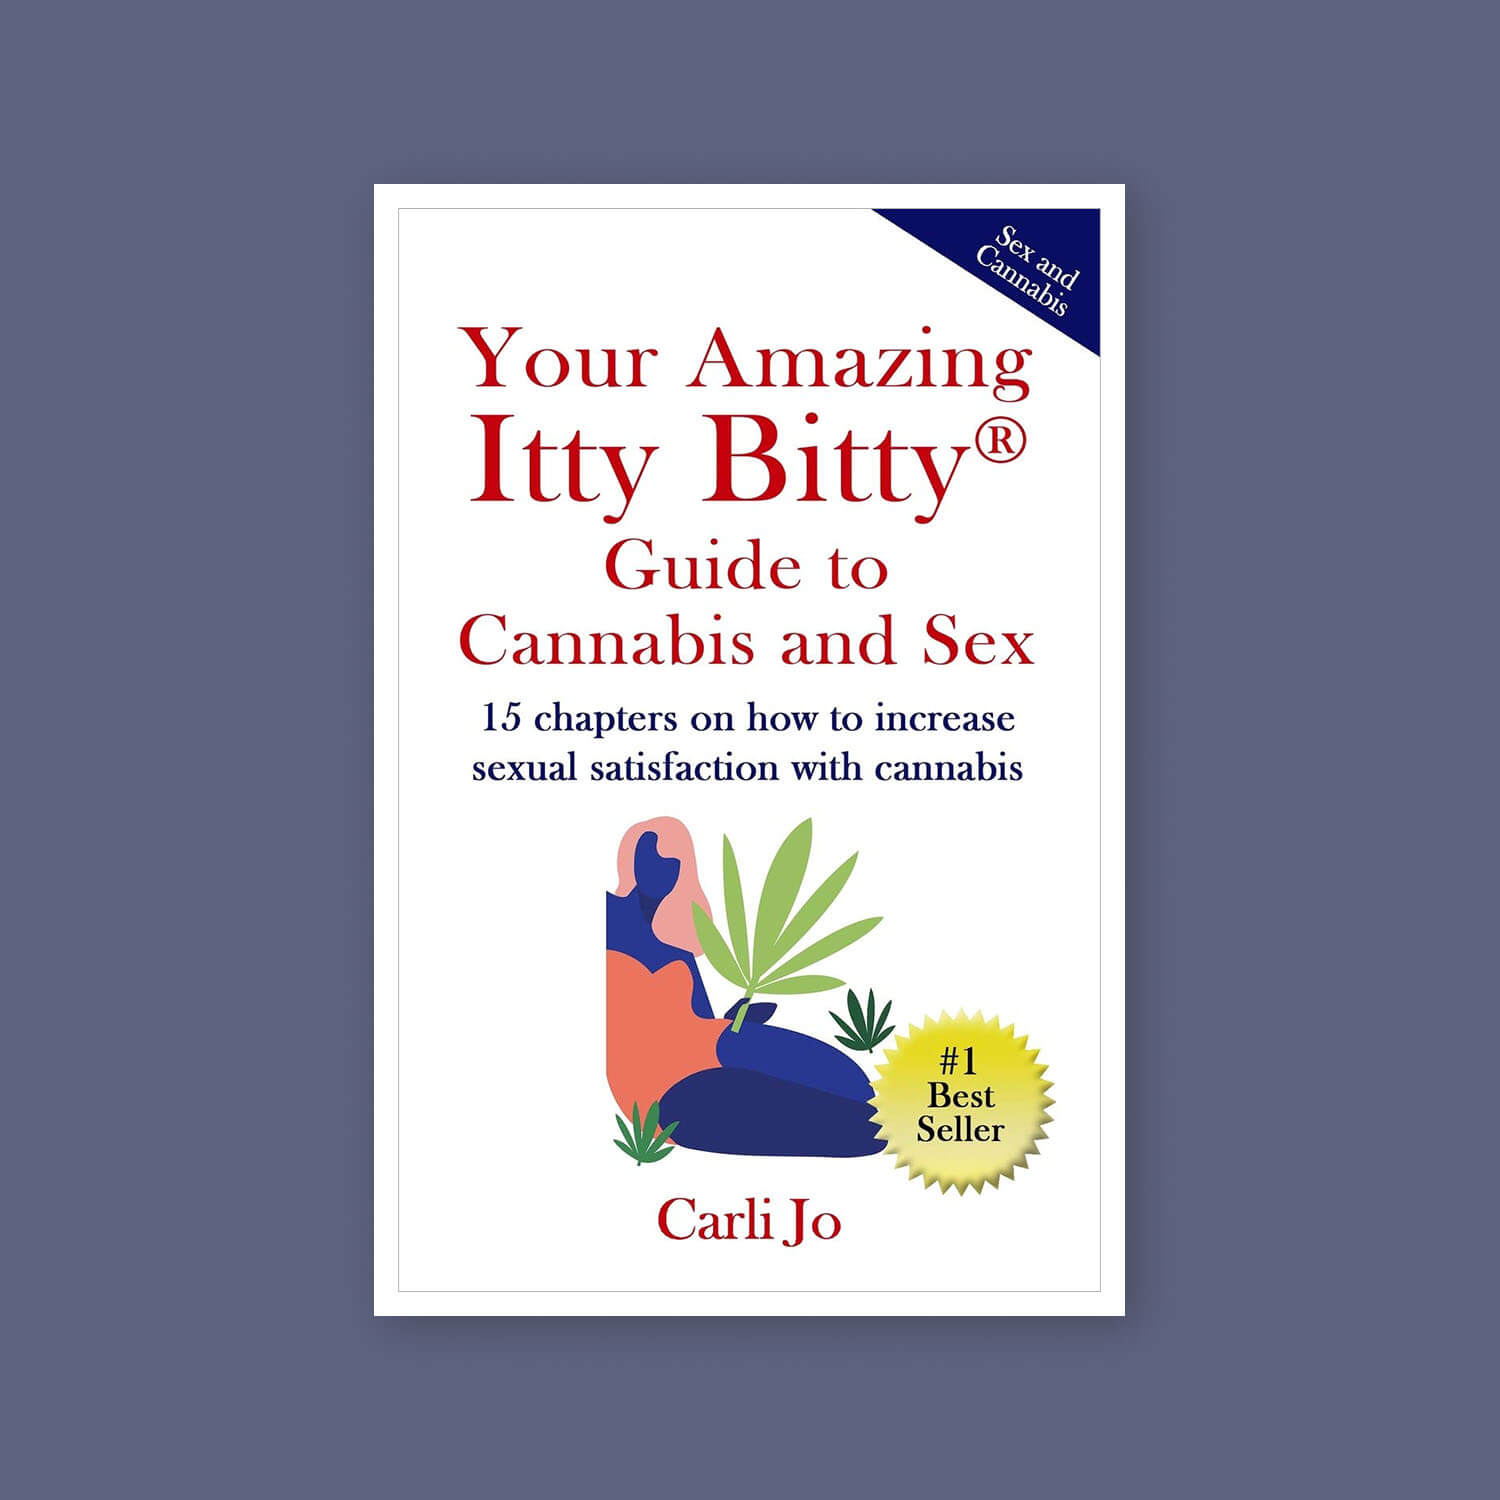 Your Amazing Itty Bitty Guide to Cannabis and Sex